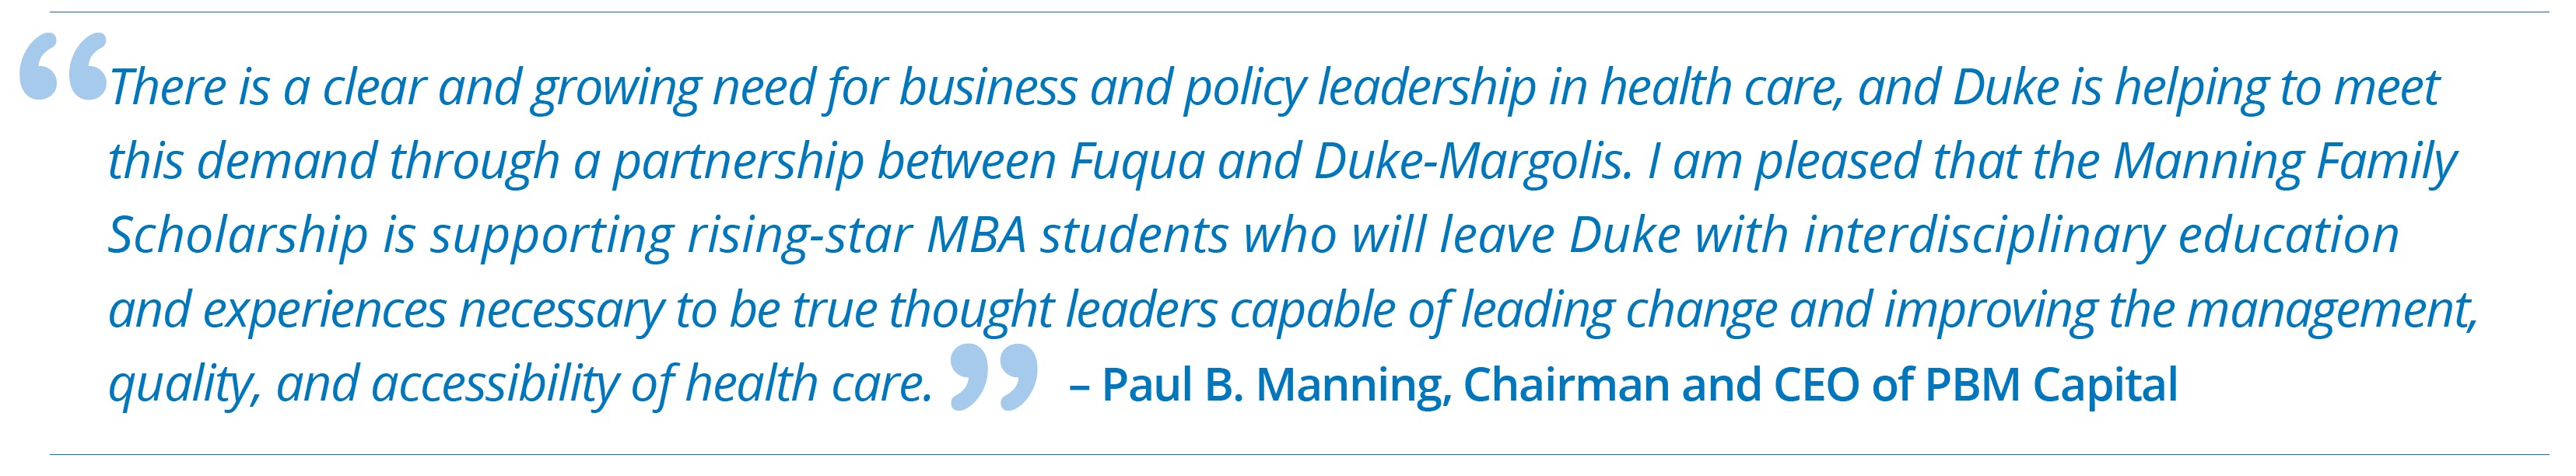 "There is a clear and growing need for business and policy leadership in health care, and Duke is helping to meet this demand through a partnership between Fuqua and Duke-Margolis. I am pleased that the Manning Family Scholarship is supporting rising-star MBA students who will leave Duke with interdisciplinary education and experiences necessary to be true thought leaders capable of leading change and improving the management, quality, and accessibility of health care" - Paul B. Manning